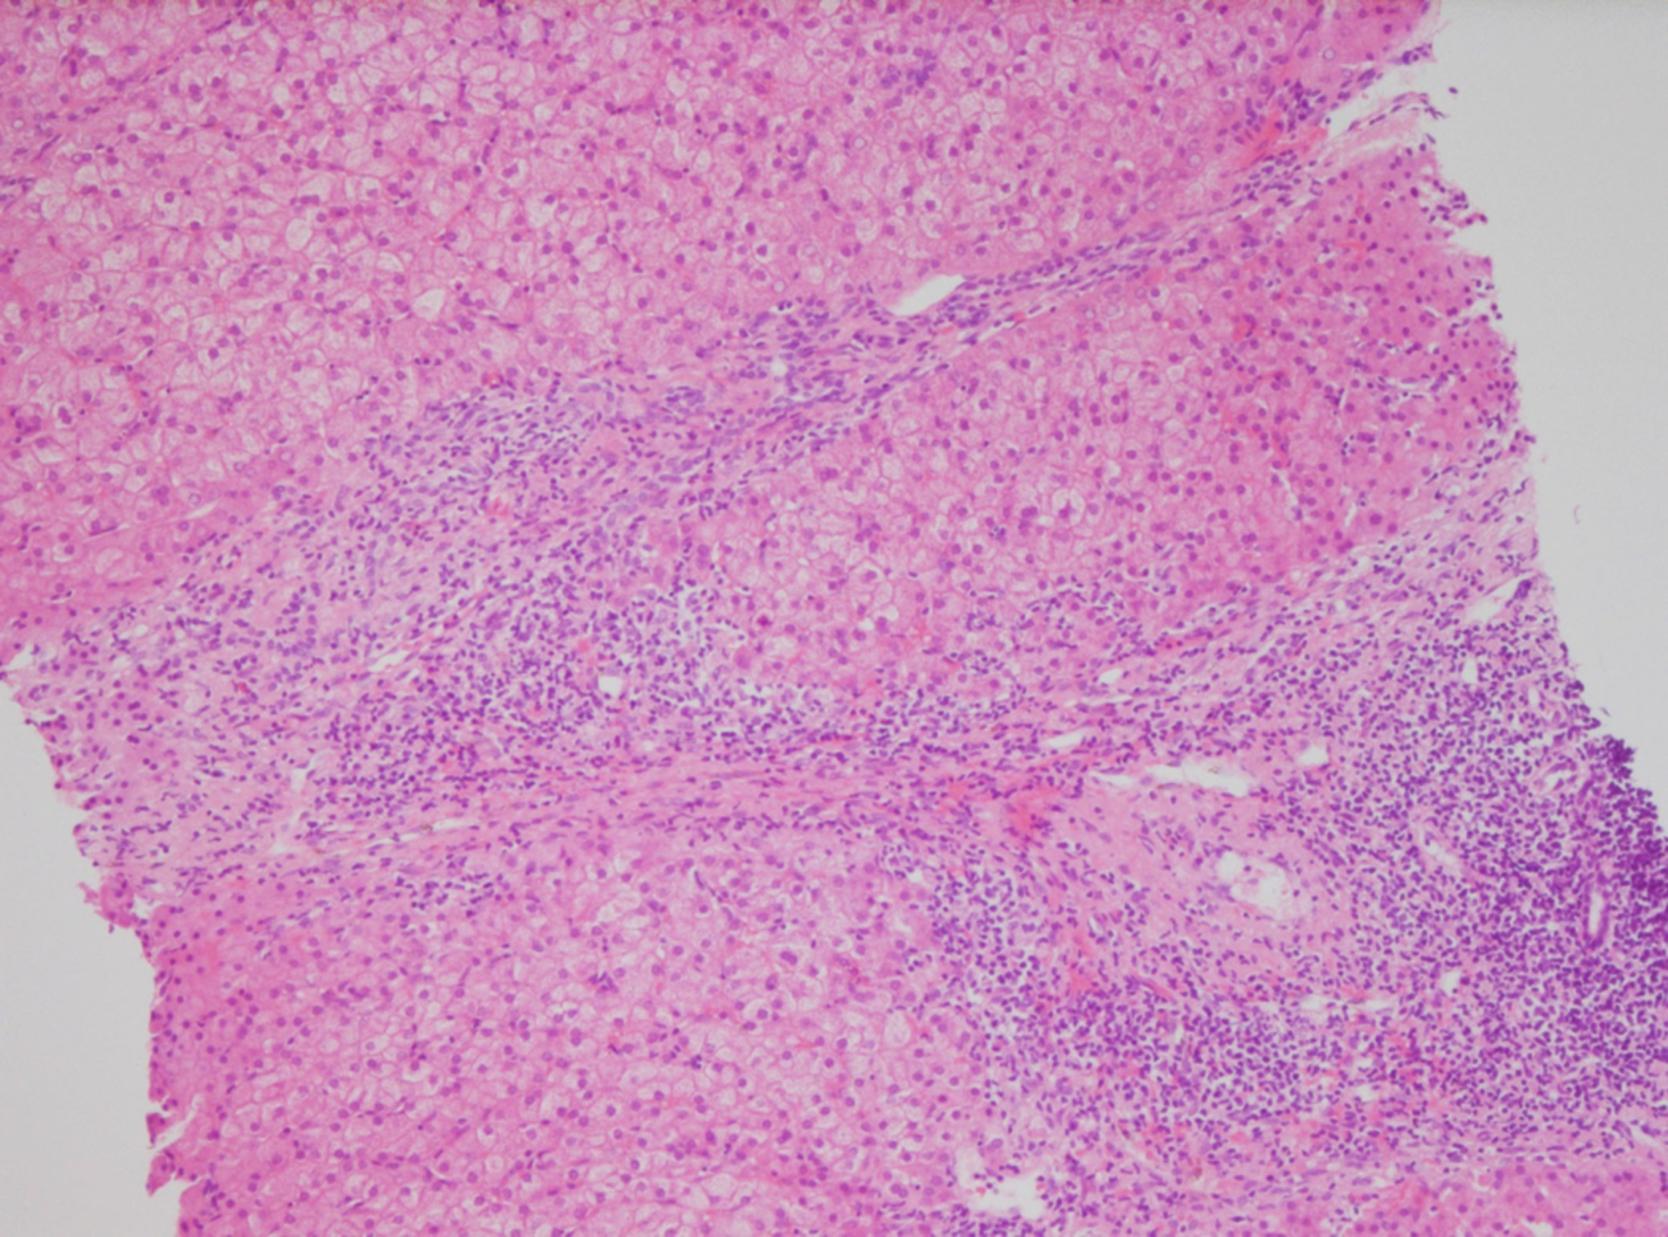 Fig. 44.3, Patient 1: Protocol biopsy 5 years after pediatric liver transplantation (hematoxylin and eosin [HE] staining, 100 × magnification) showing portal inflammation and periportal fibrosis (liver allograft fibrosis score, 3/9) with interface activity.